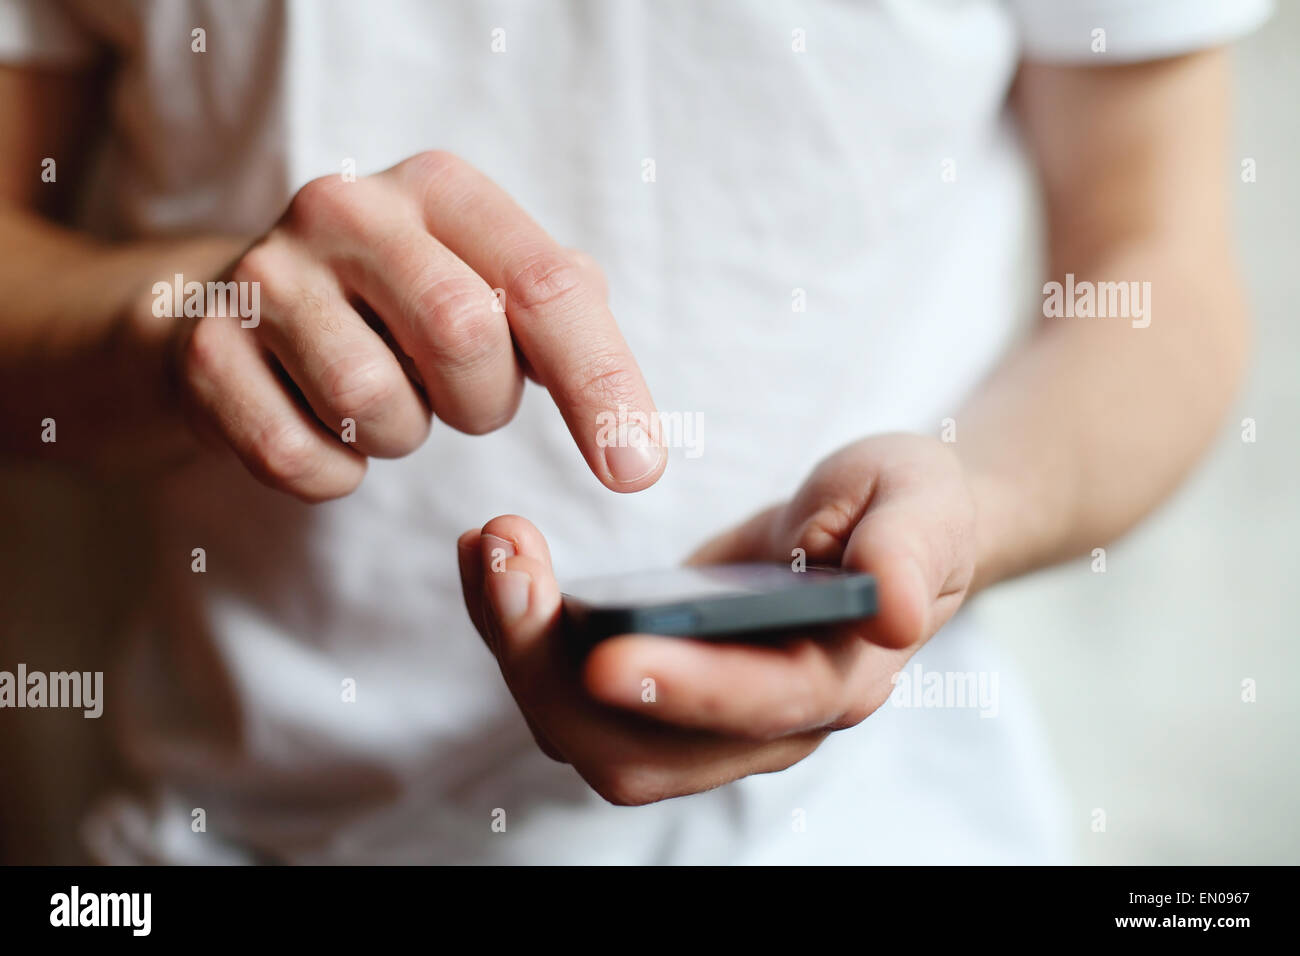 mobile access to social networks Stock Photo